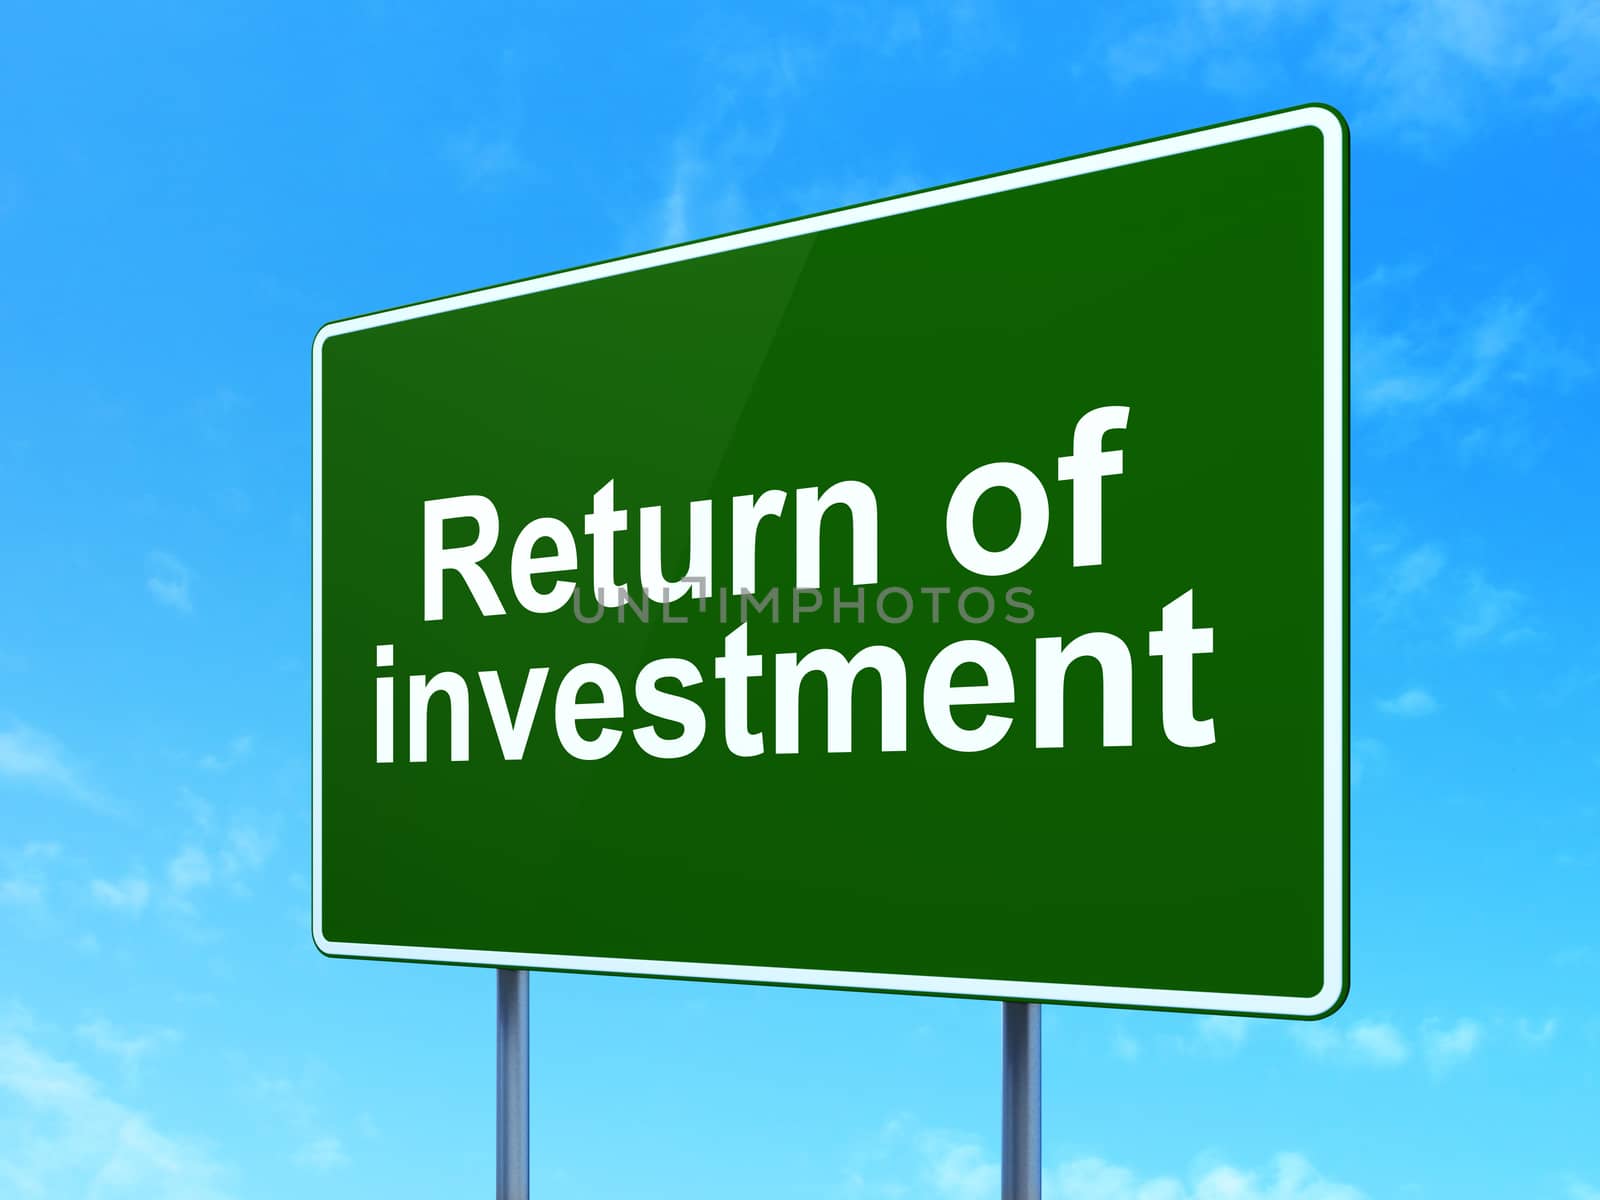 Finance concept: Return of Investment on green road highway sign, clear blue sky background, 3D rendering